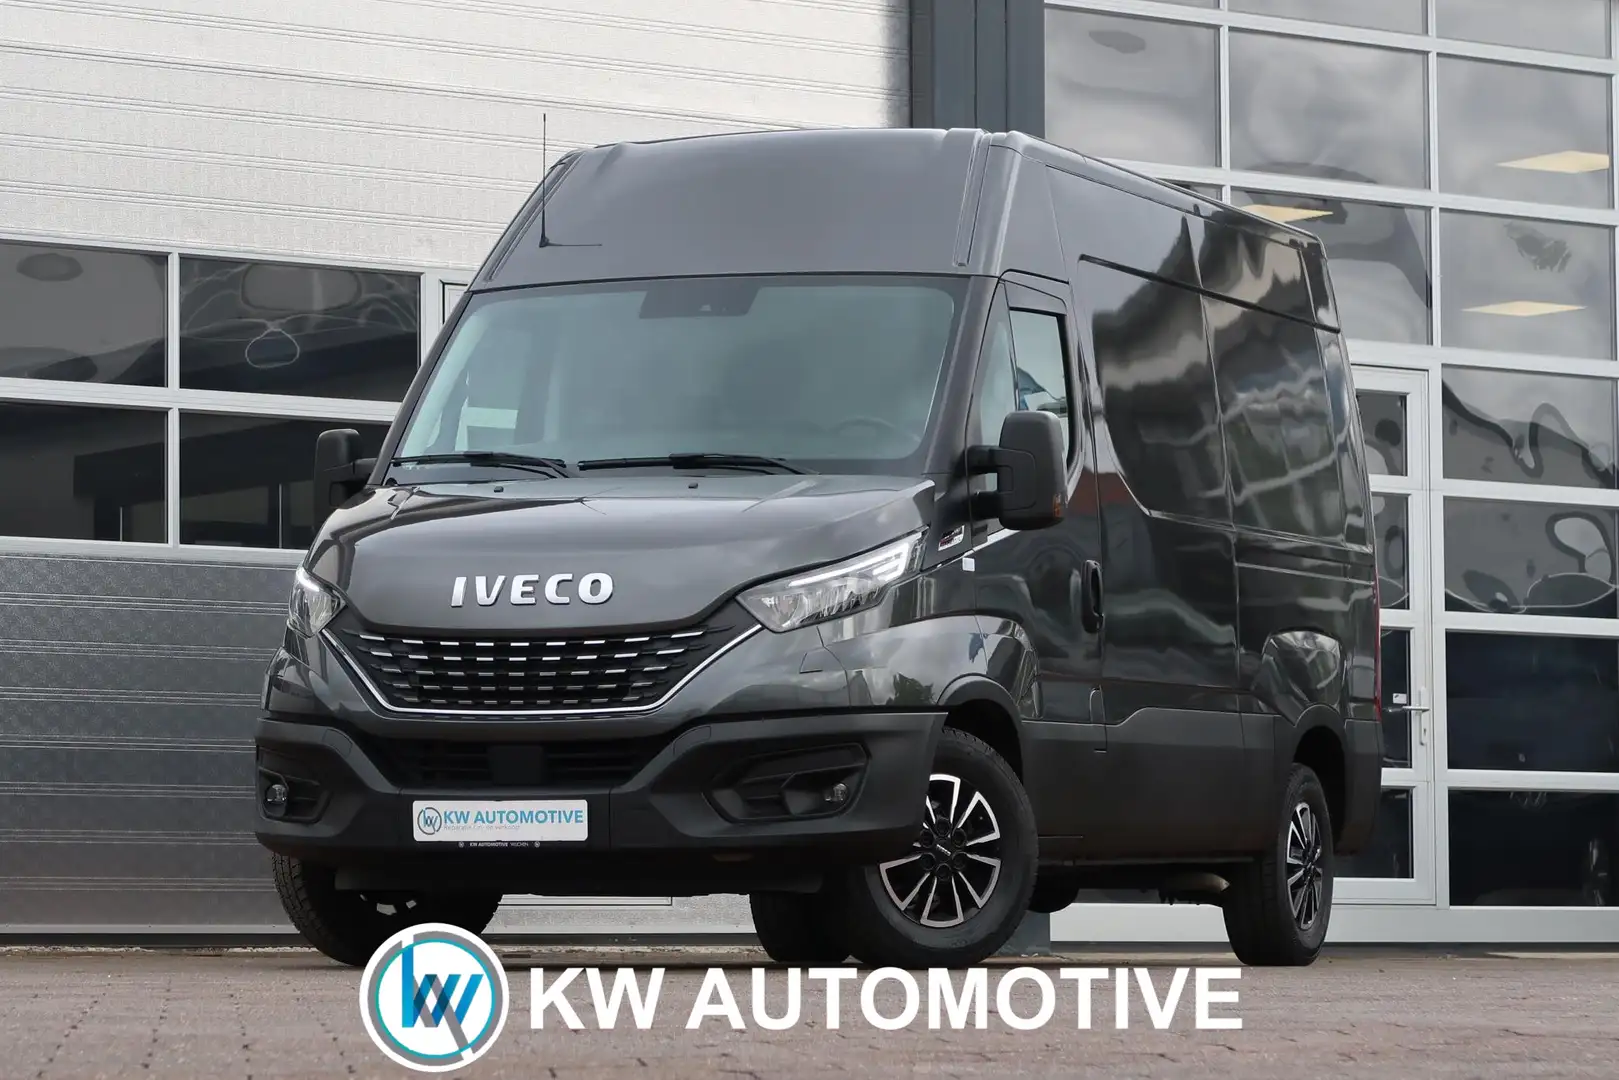 Iveco Daily 35S21V 3.0 352 AUT/ LUCHT/ CAMERA/ LED/ ACC/ NAVI/ Grey - 1